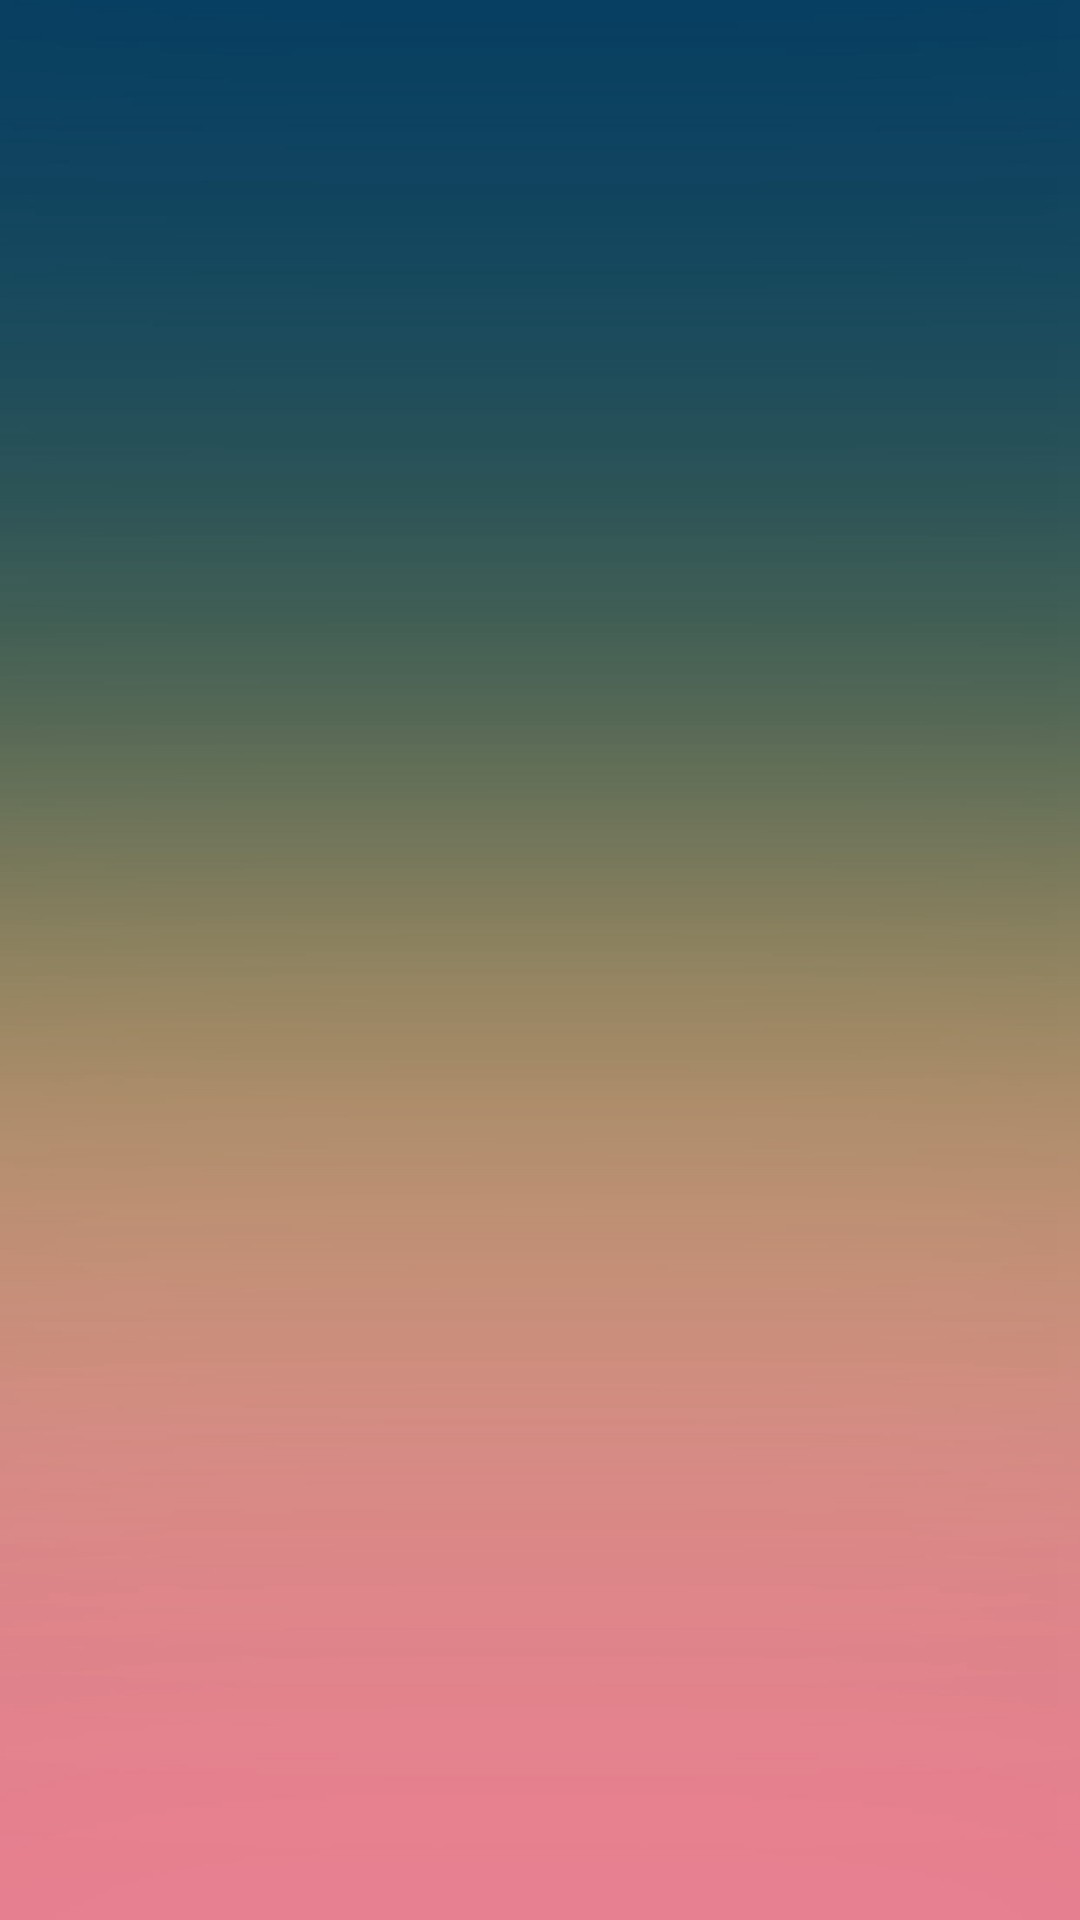 1080x1920 Ugly People Color Gradation Blur iPhone 6 wallpaper